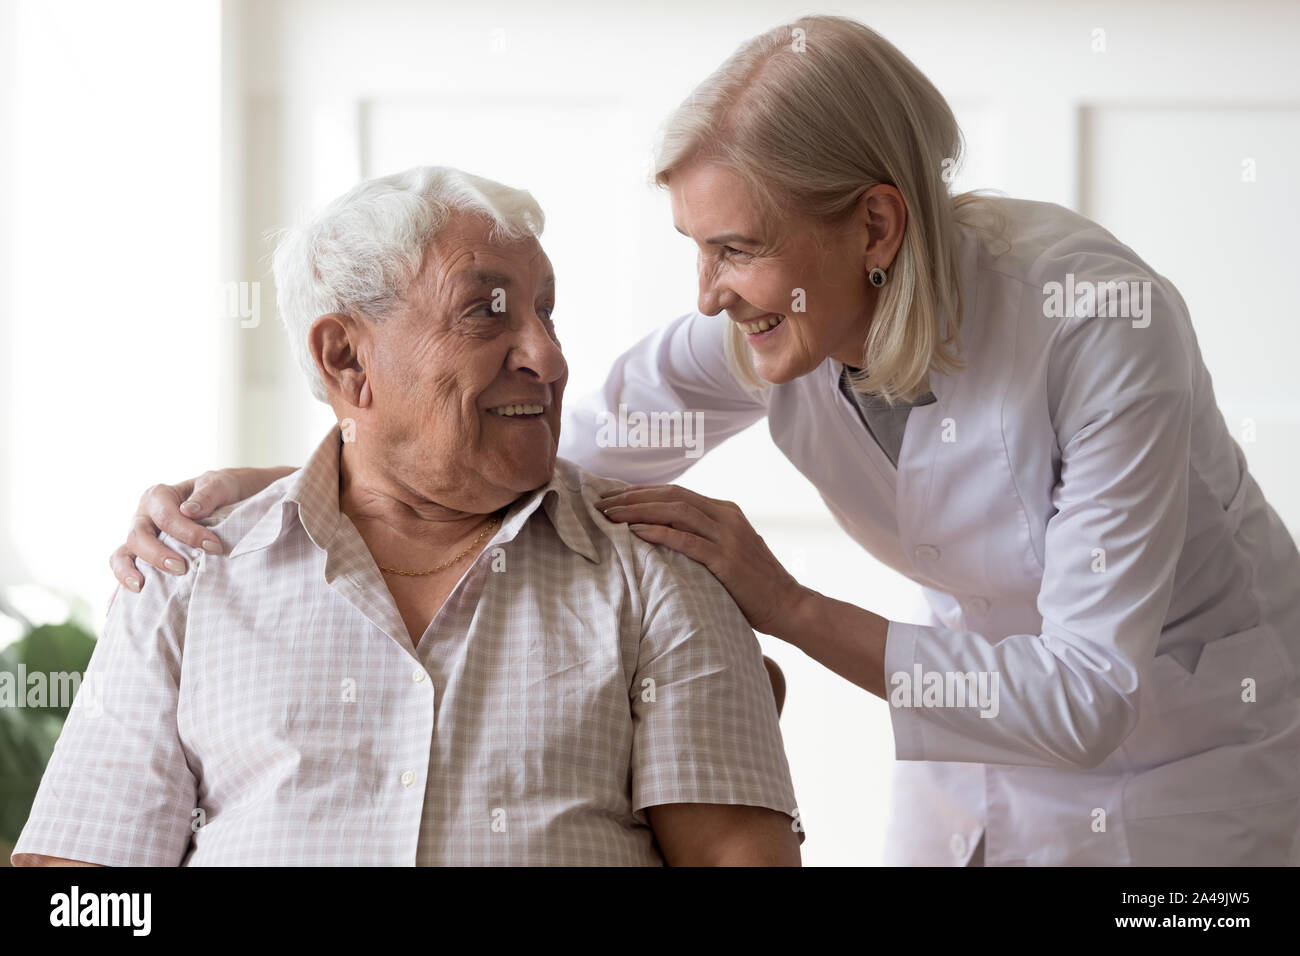 Senior man clinic patient interacting with nurse in white coat Stock Photo